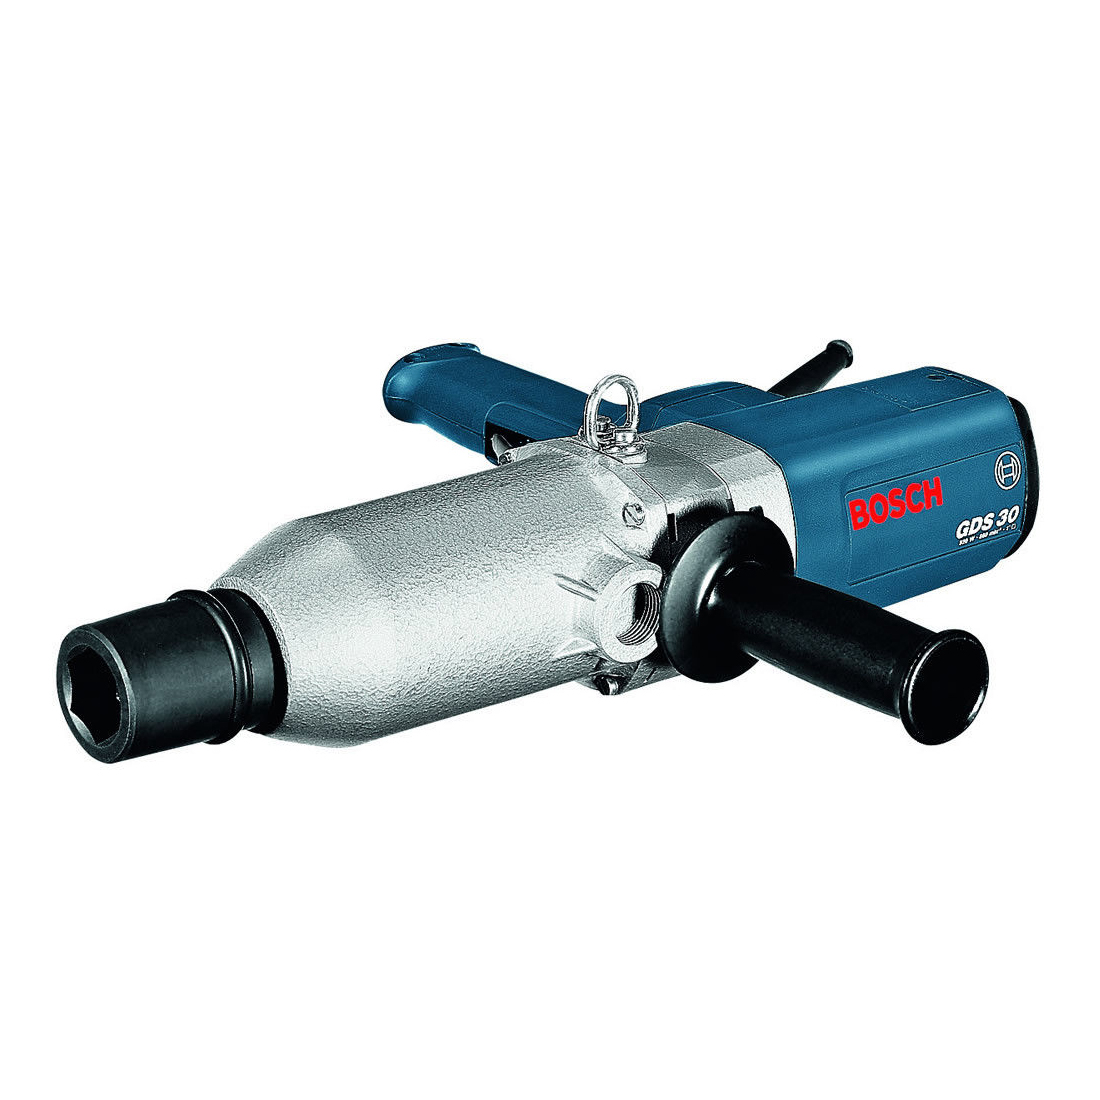 25Mm Impact Wrench - 110V